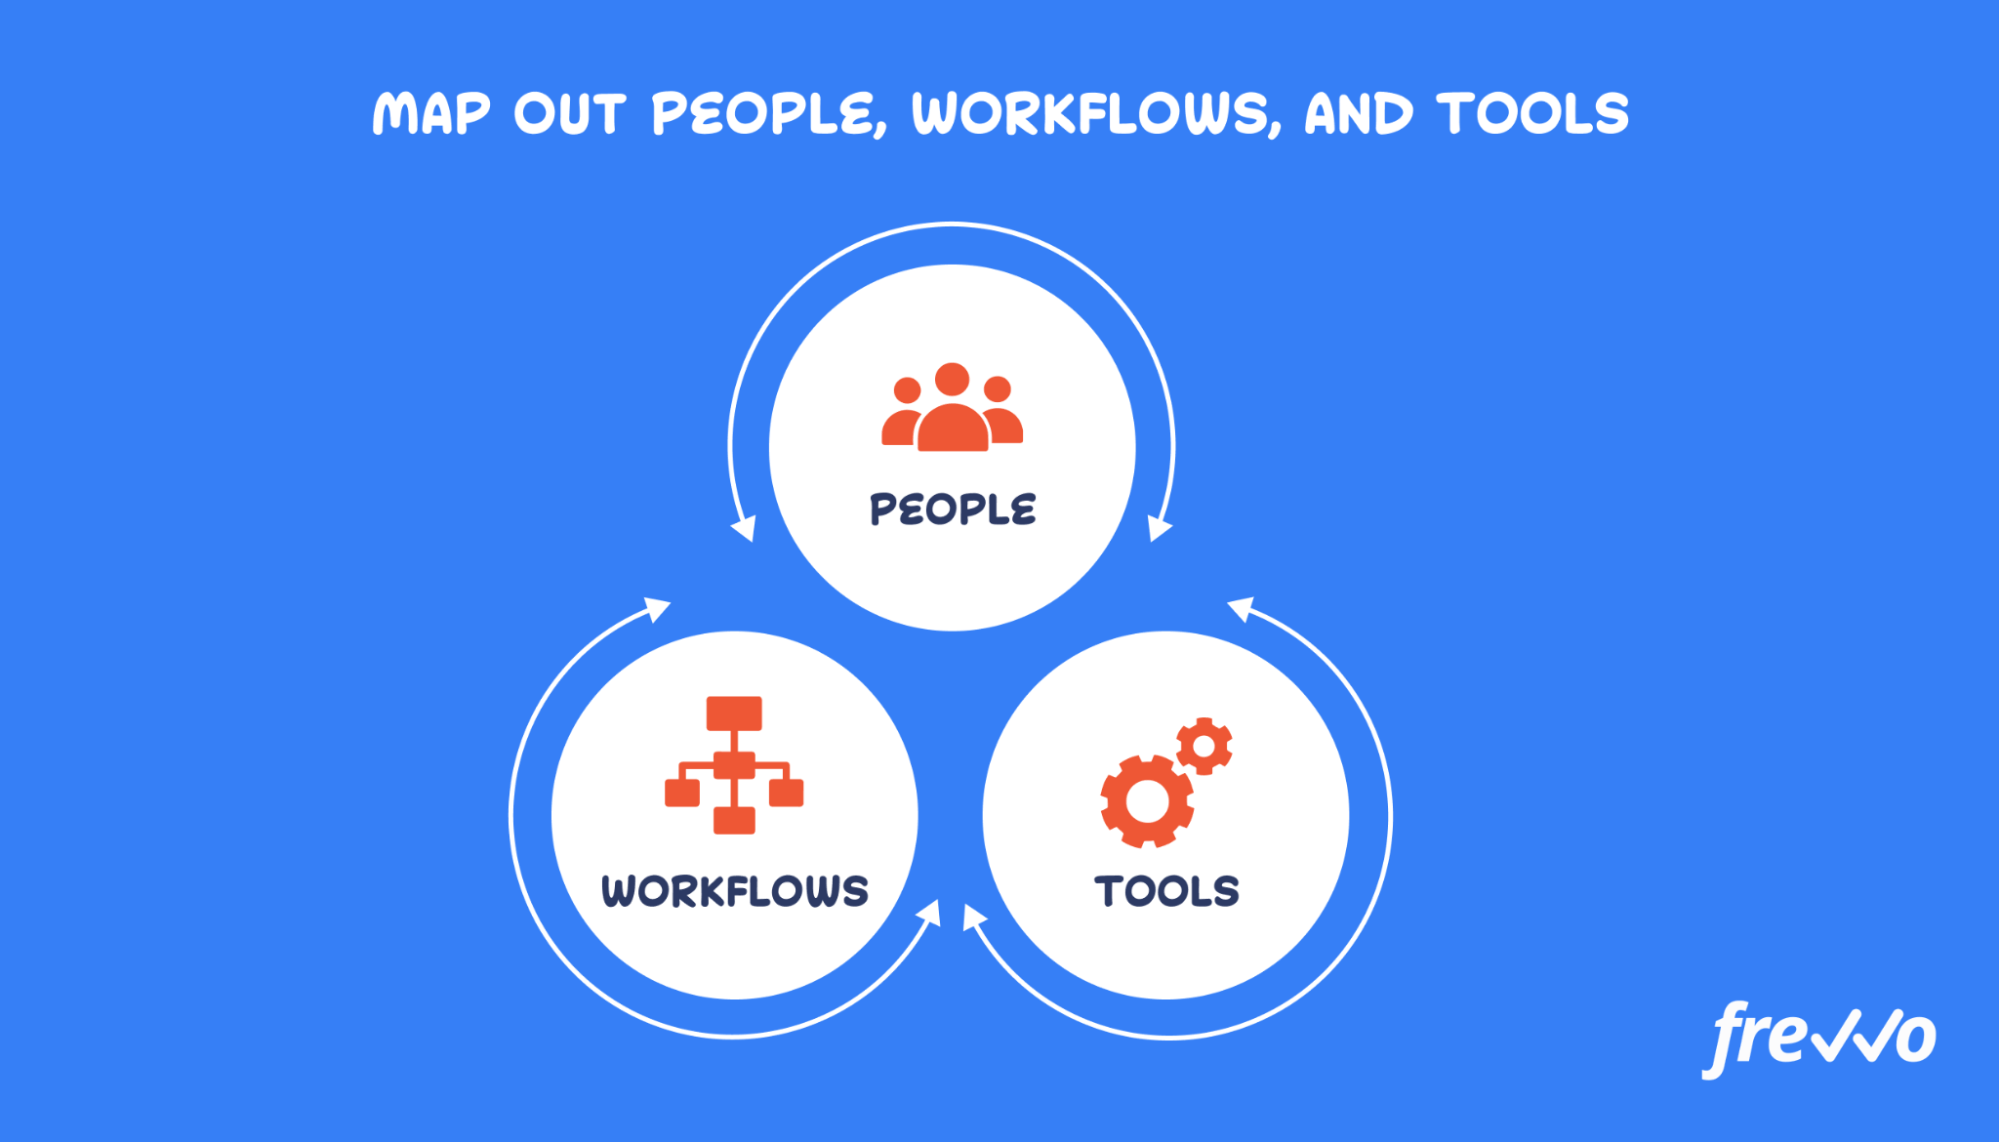 Map of people, workflows, and tools